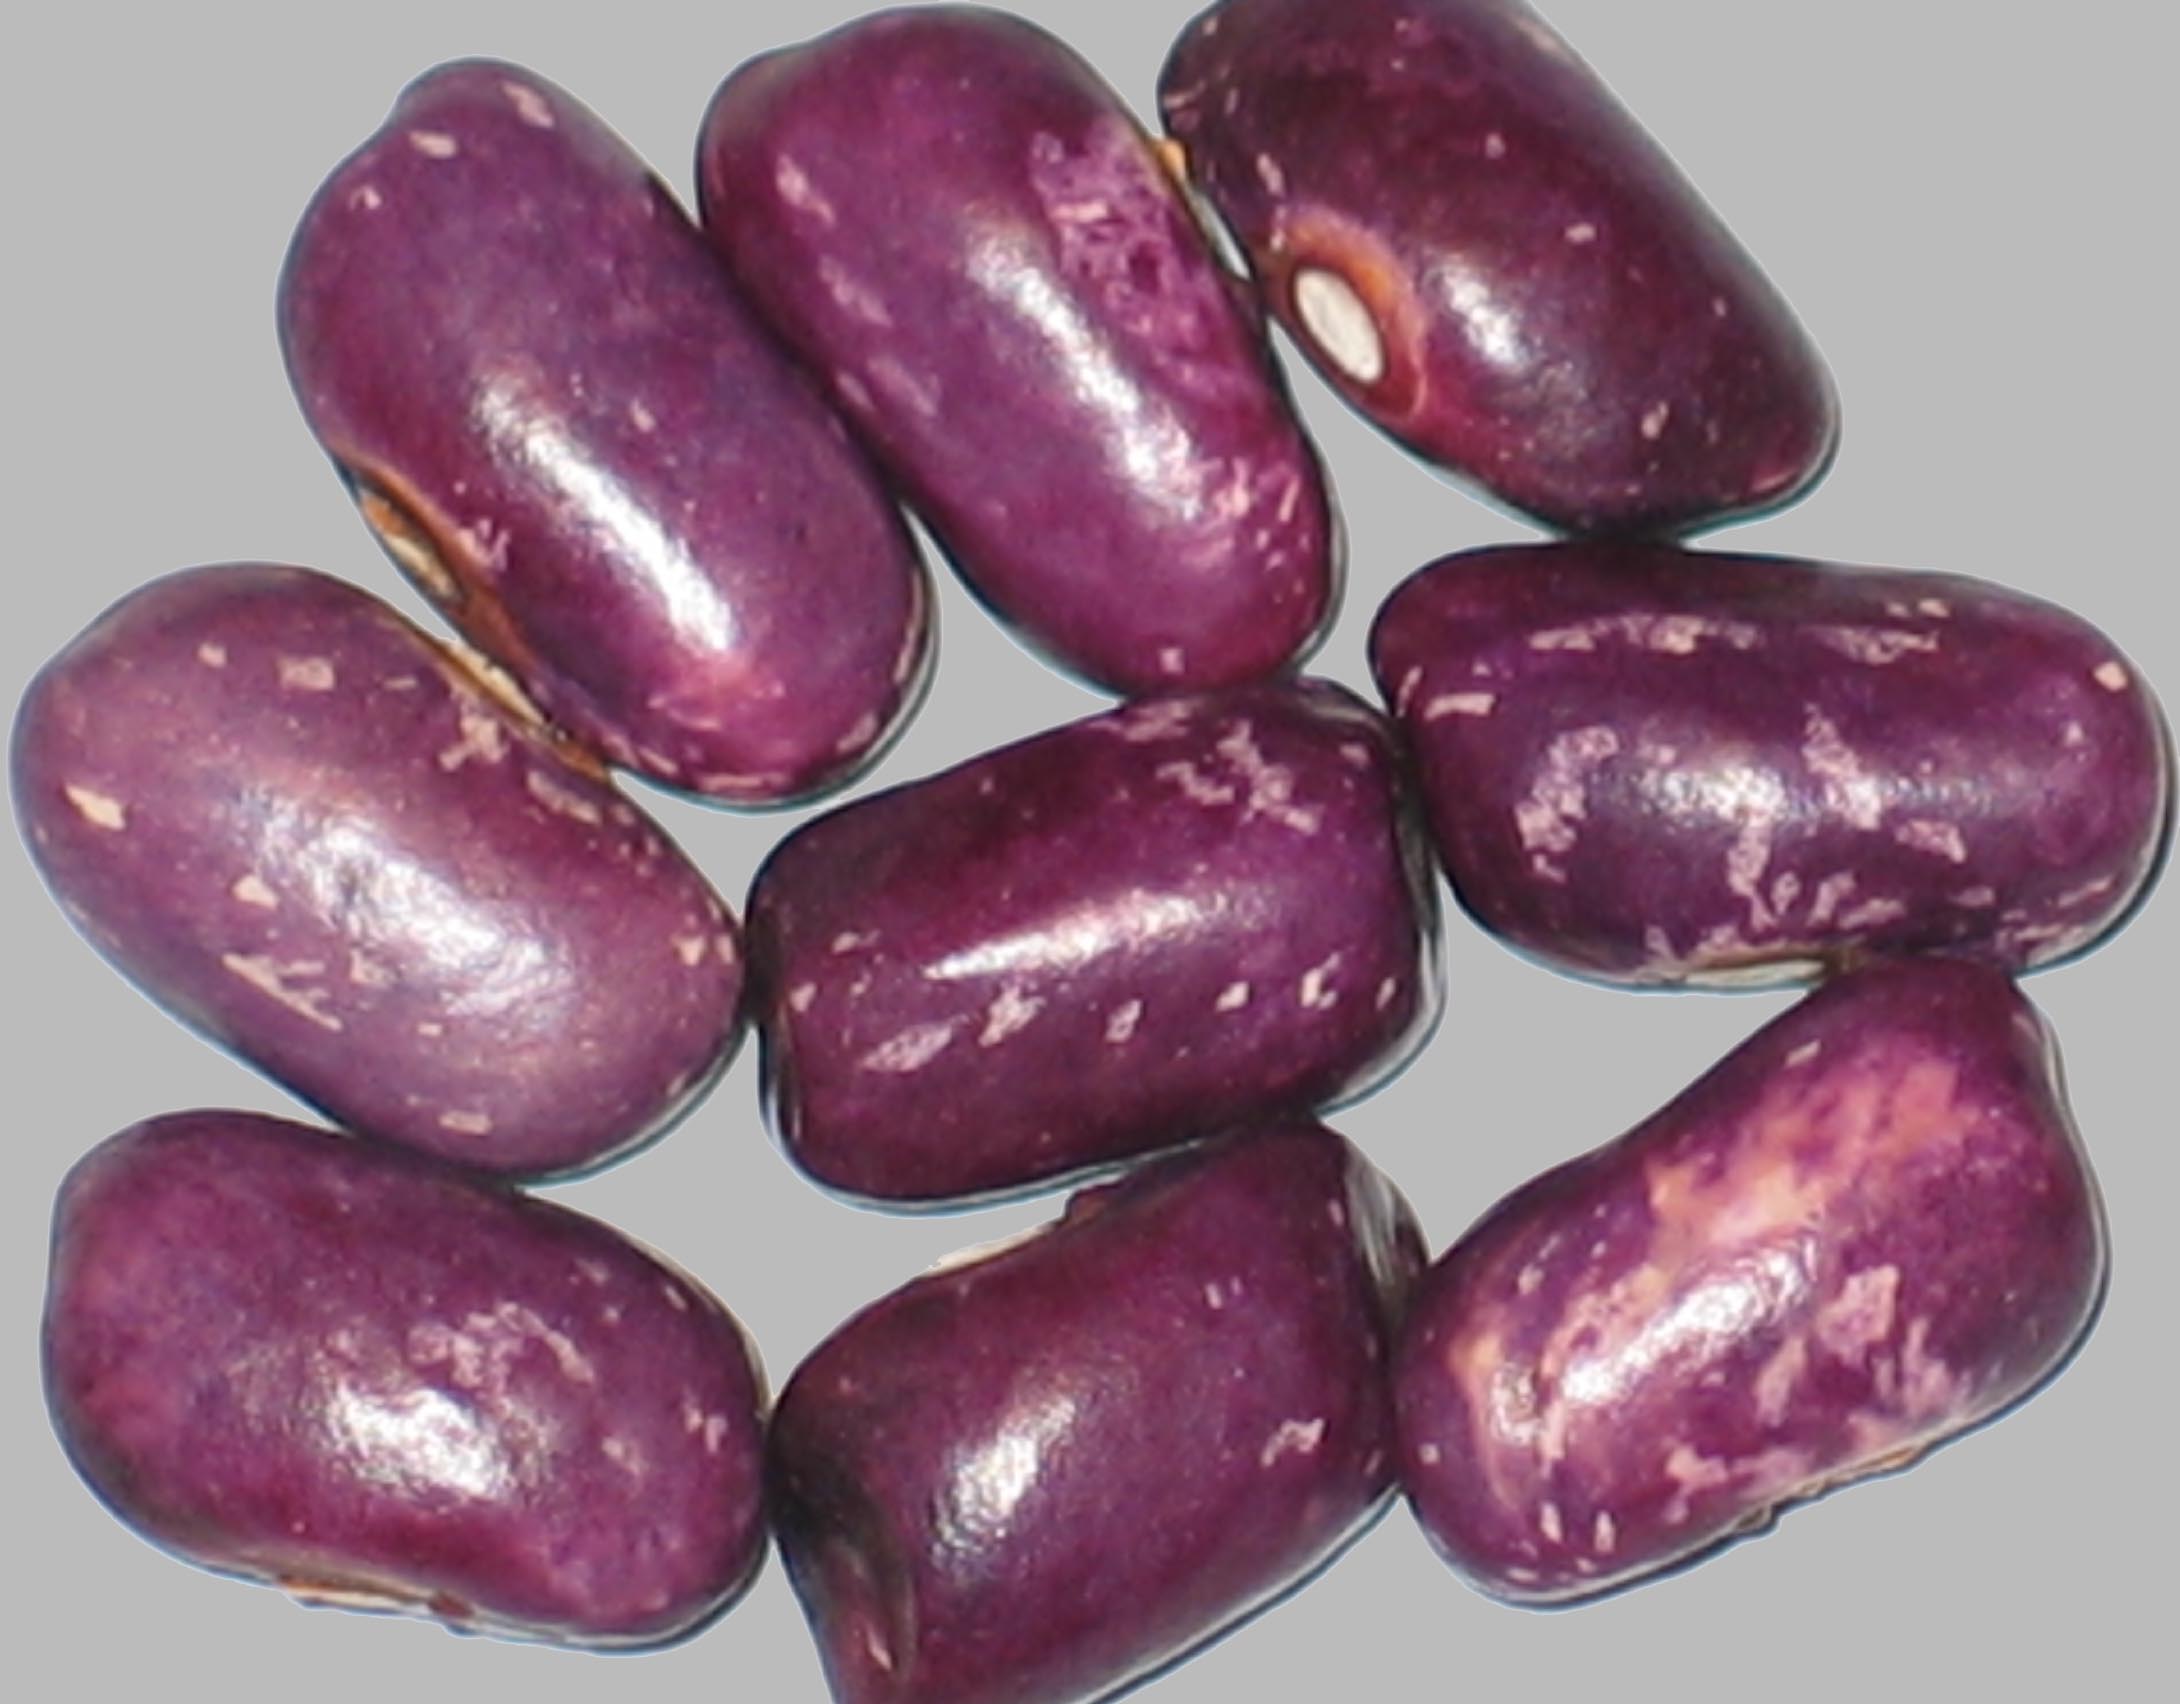 image of Prince Purple beans